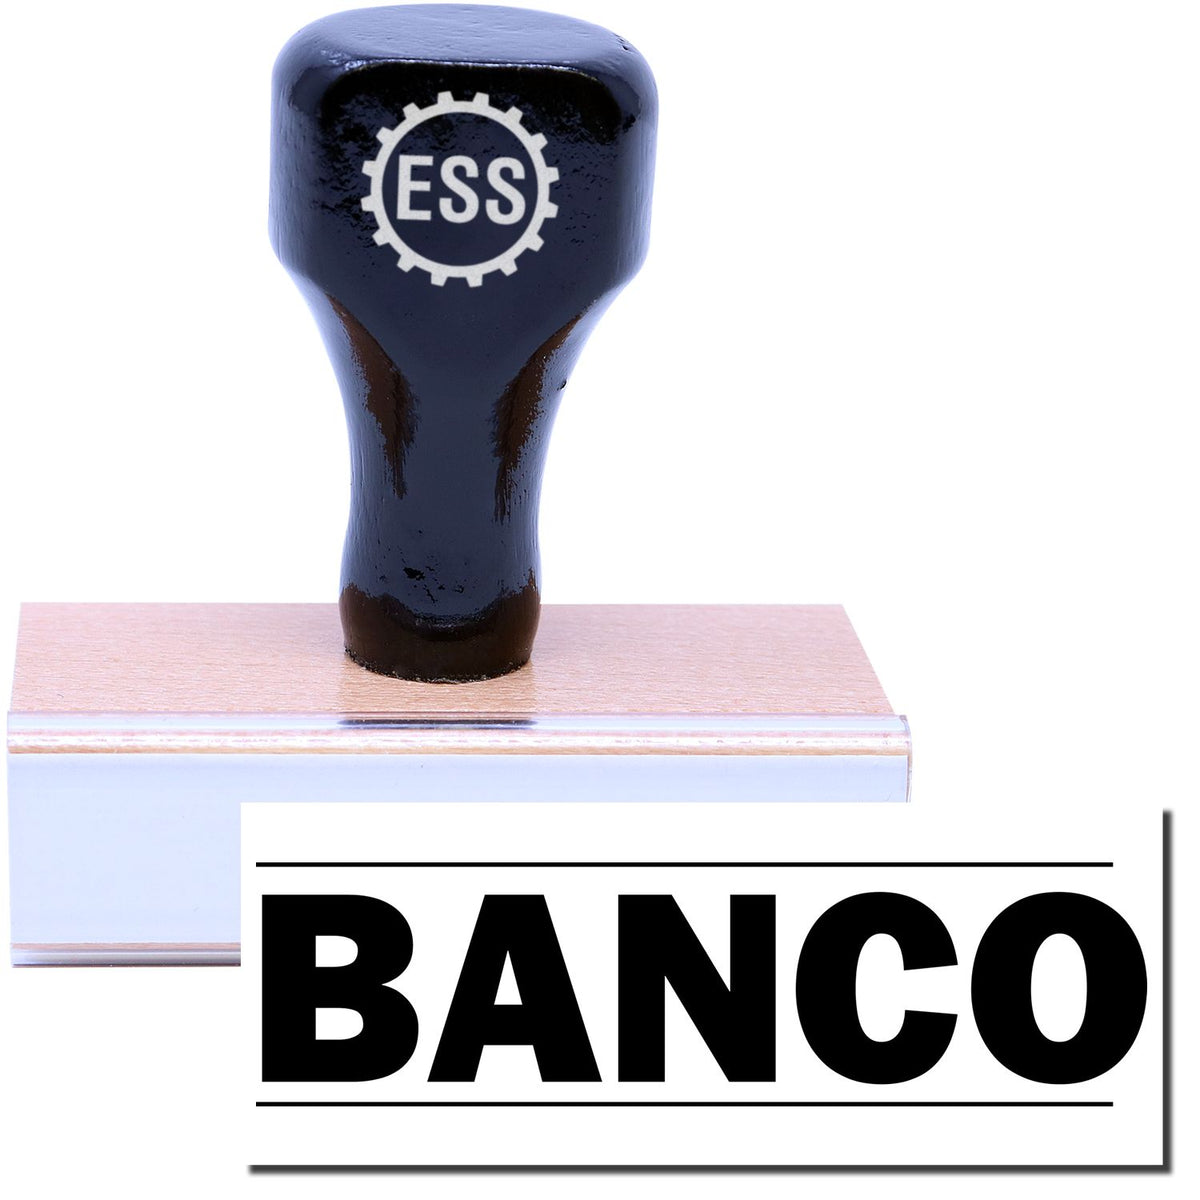 A stock office rubber stamp with a stamped image showing how the text &quot;BANCO&quot; in a large bold font with a line both above and below the text is displayed after stamping.